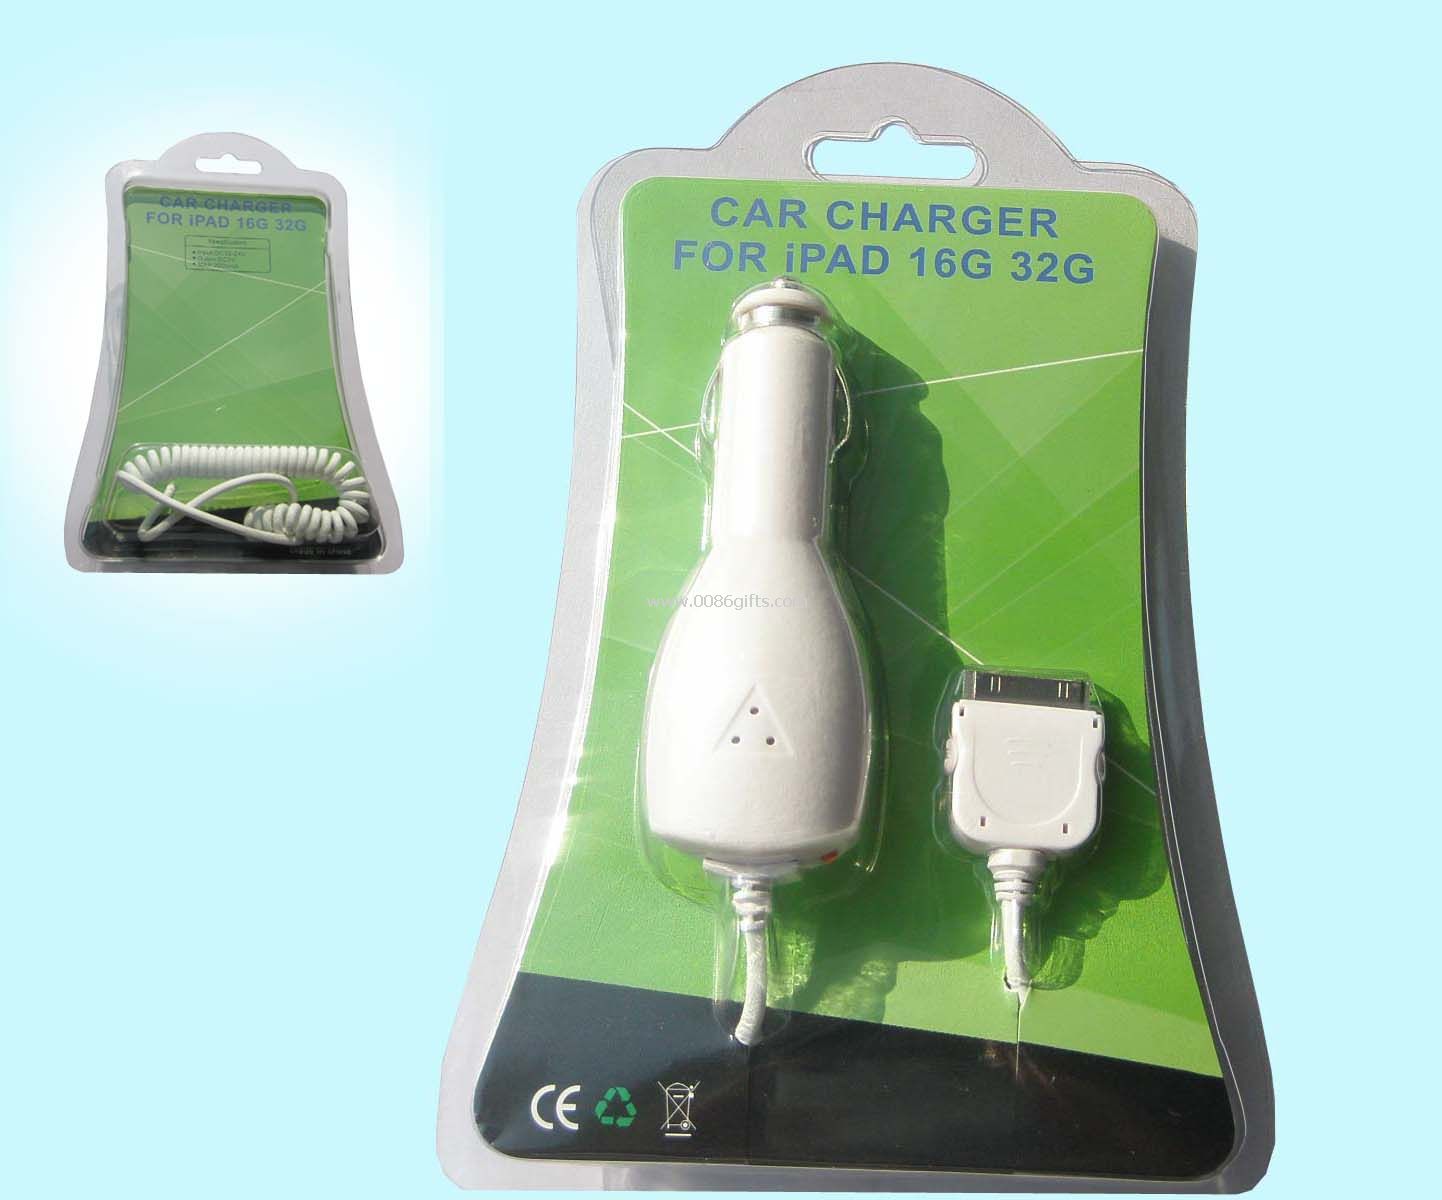 ipad 2 car charger with cable